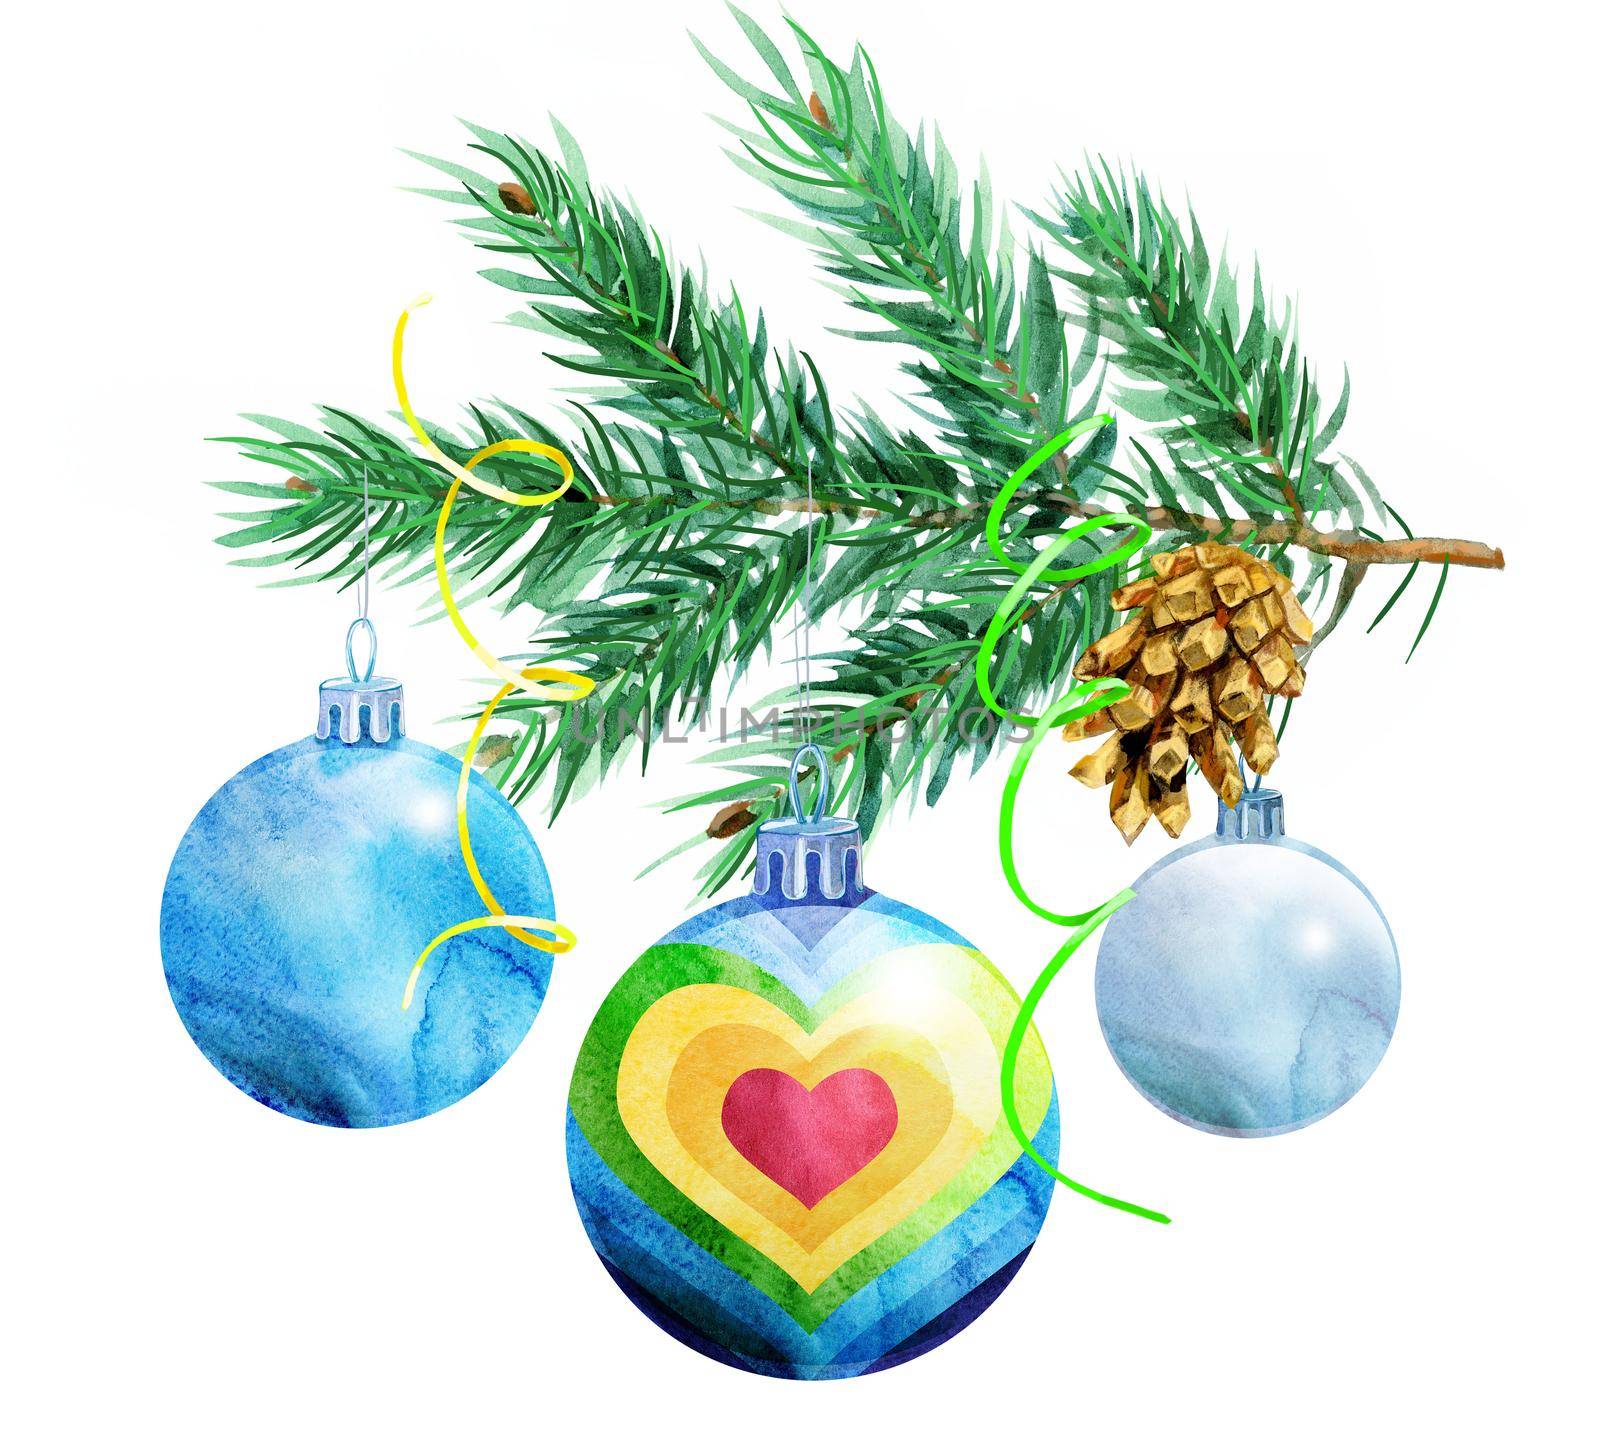 Spruce branch with christmas decorations with the image of a rainbow, hand drawn watercolor illustration